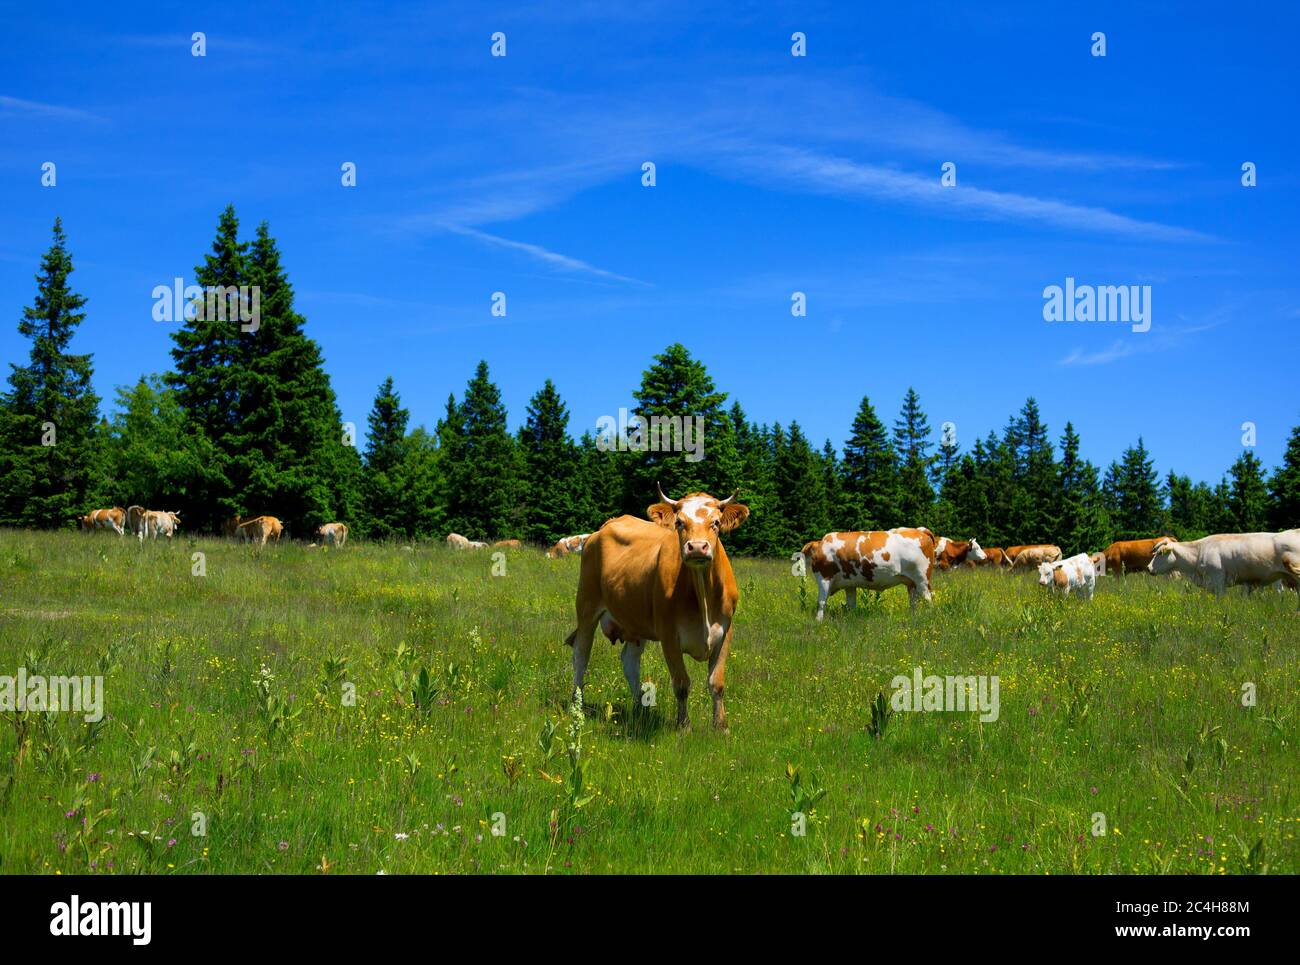 Rogla, Pohorje mountain range, Slovenia, Europe - cows on pasture. Scenery of beautiful slovenian nature and animal agriculture Stock Photo